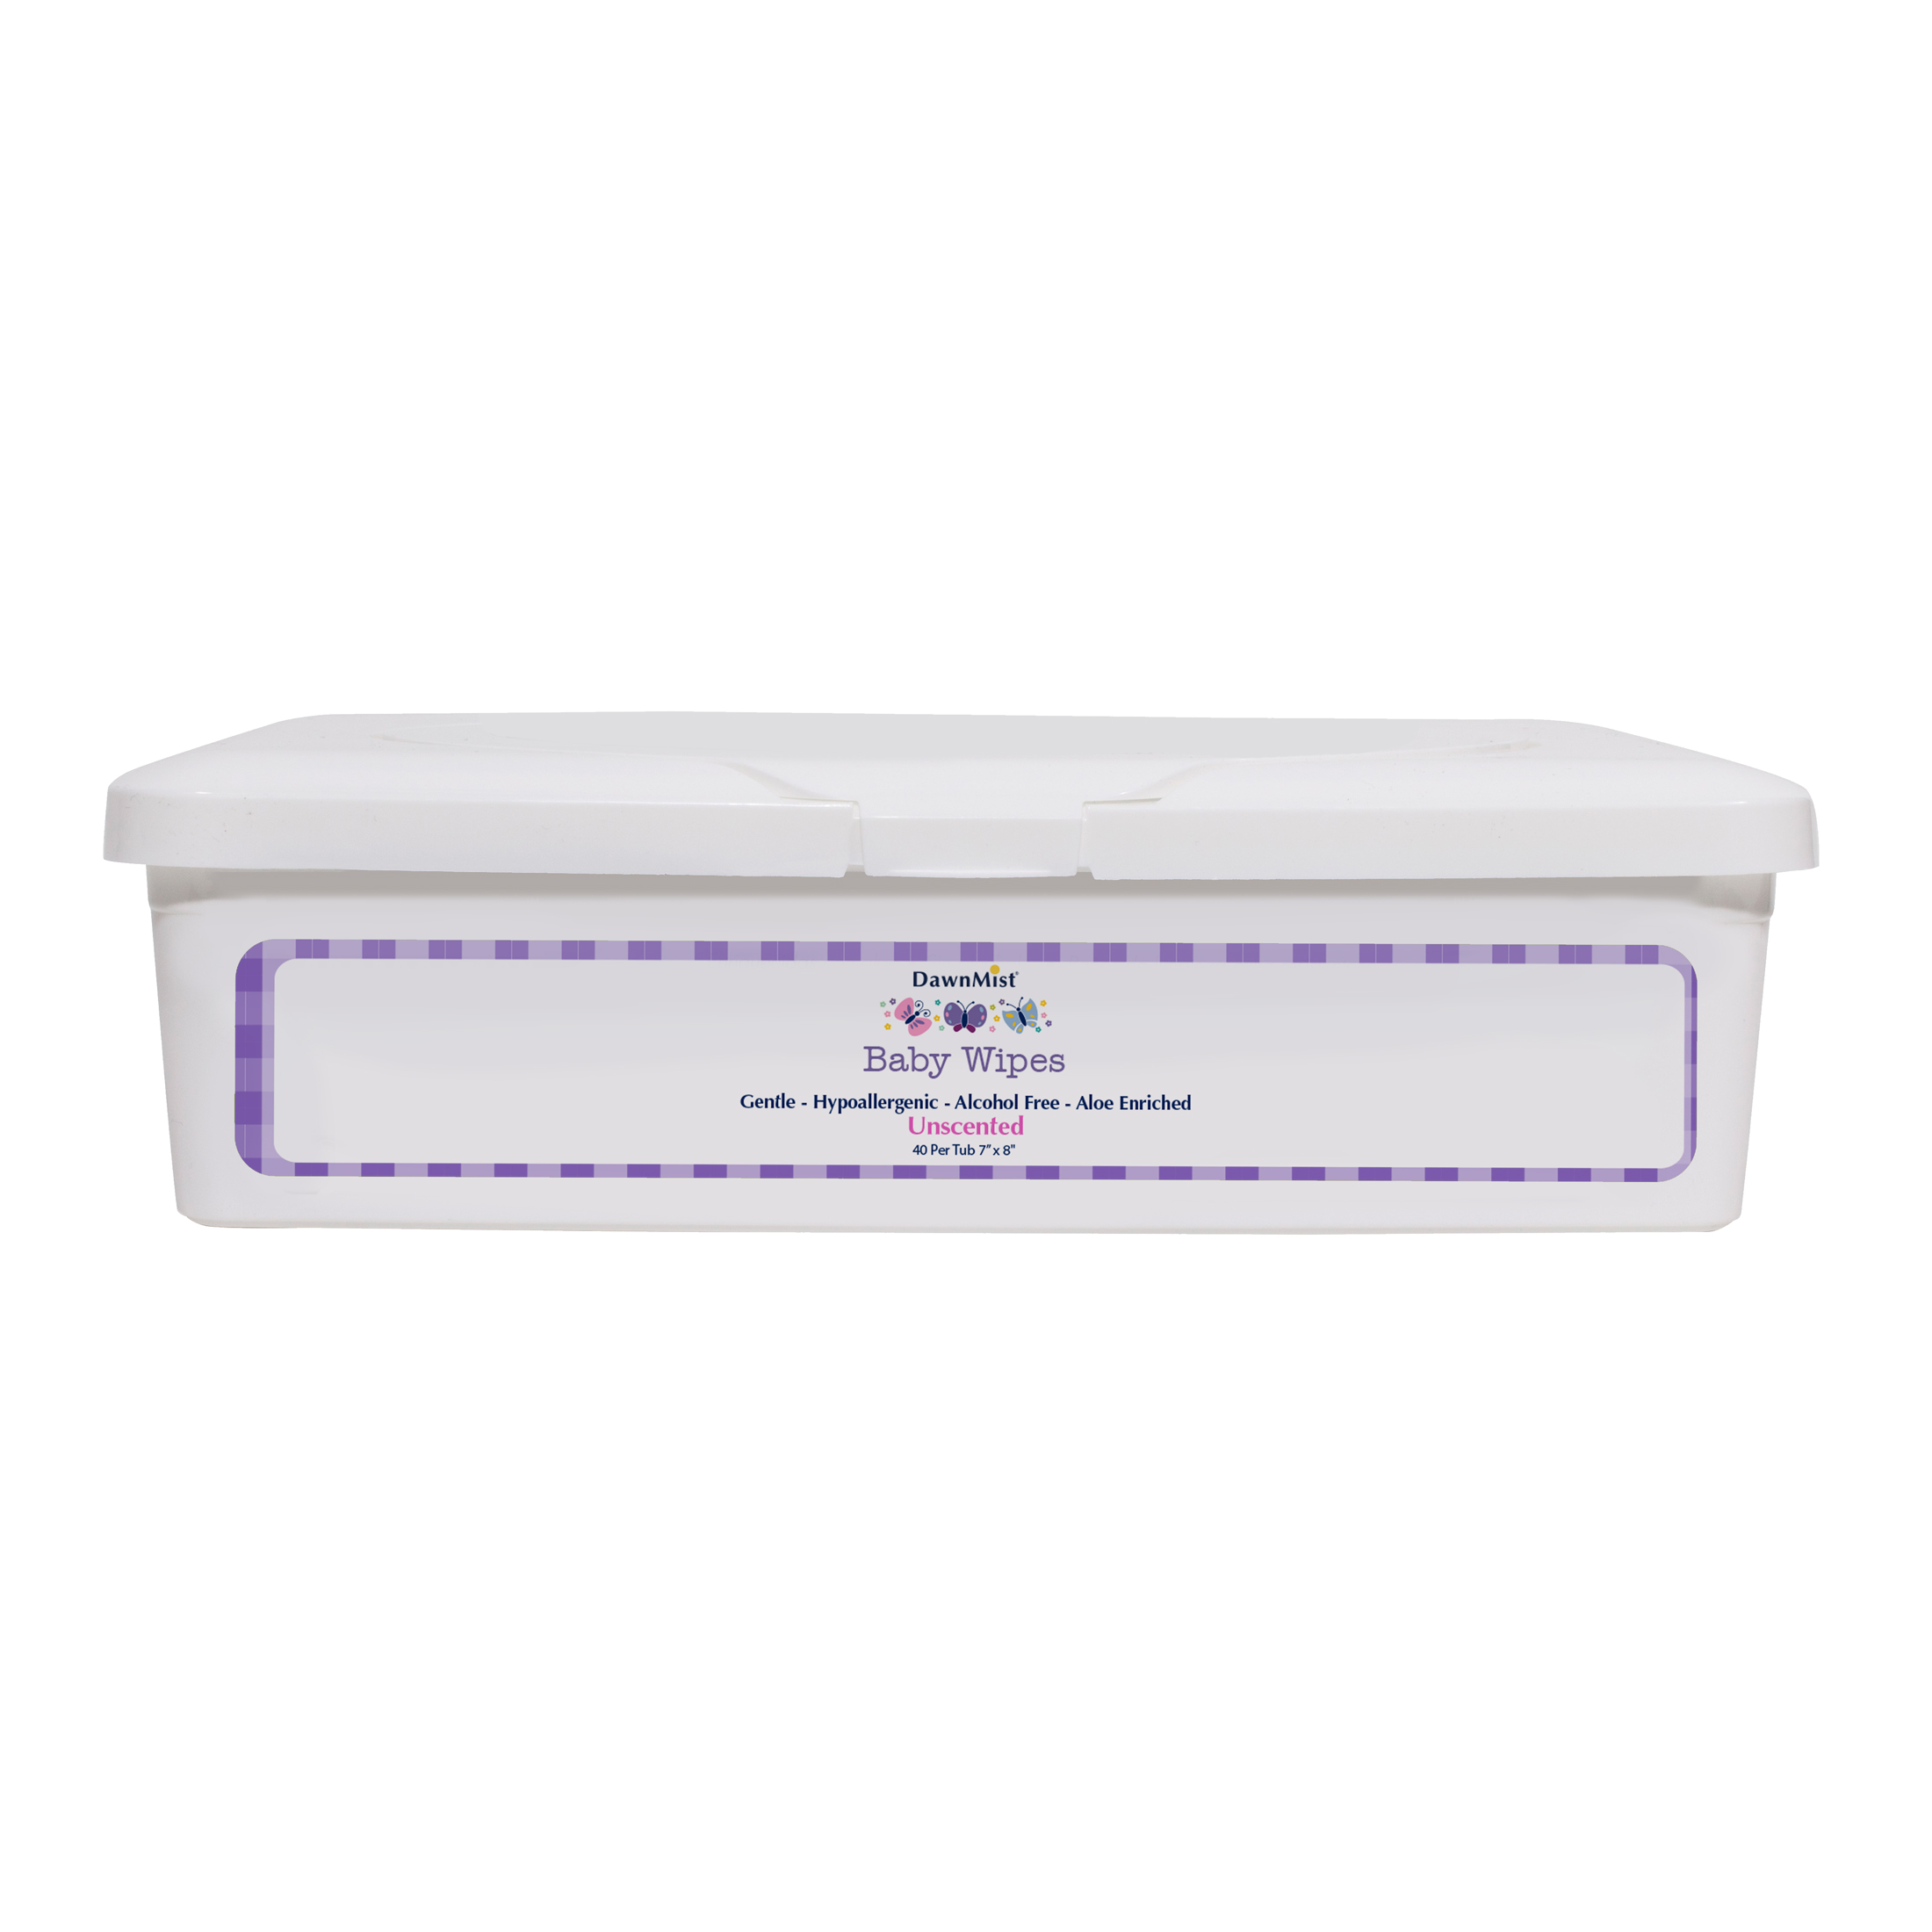 Baby Wipes Products, Supplies and Equipment